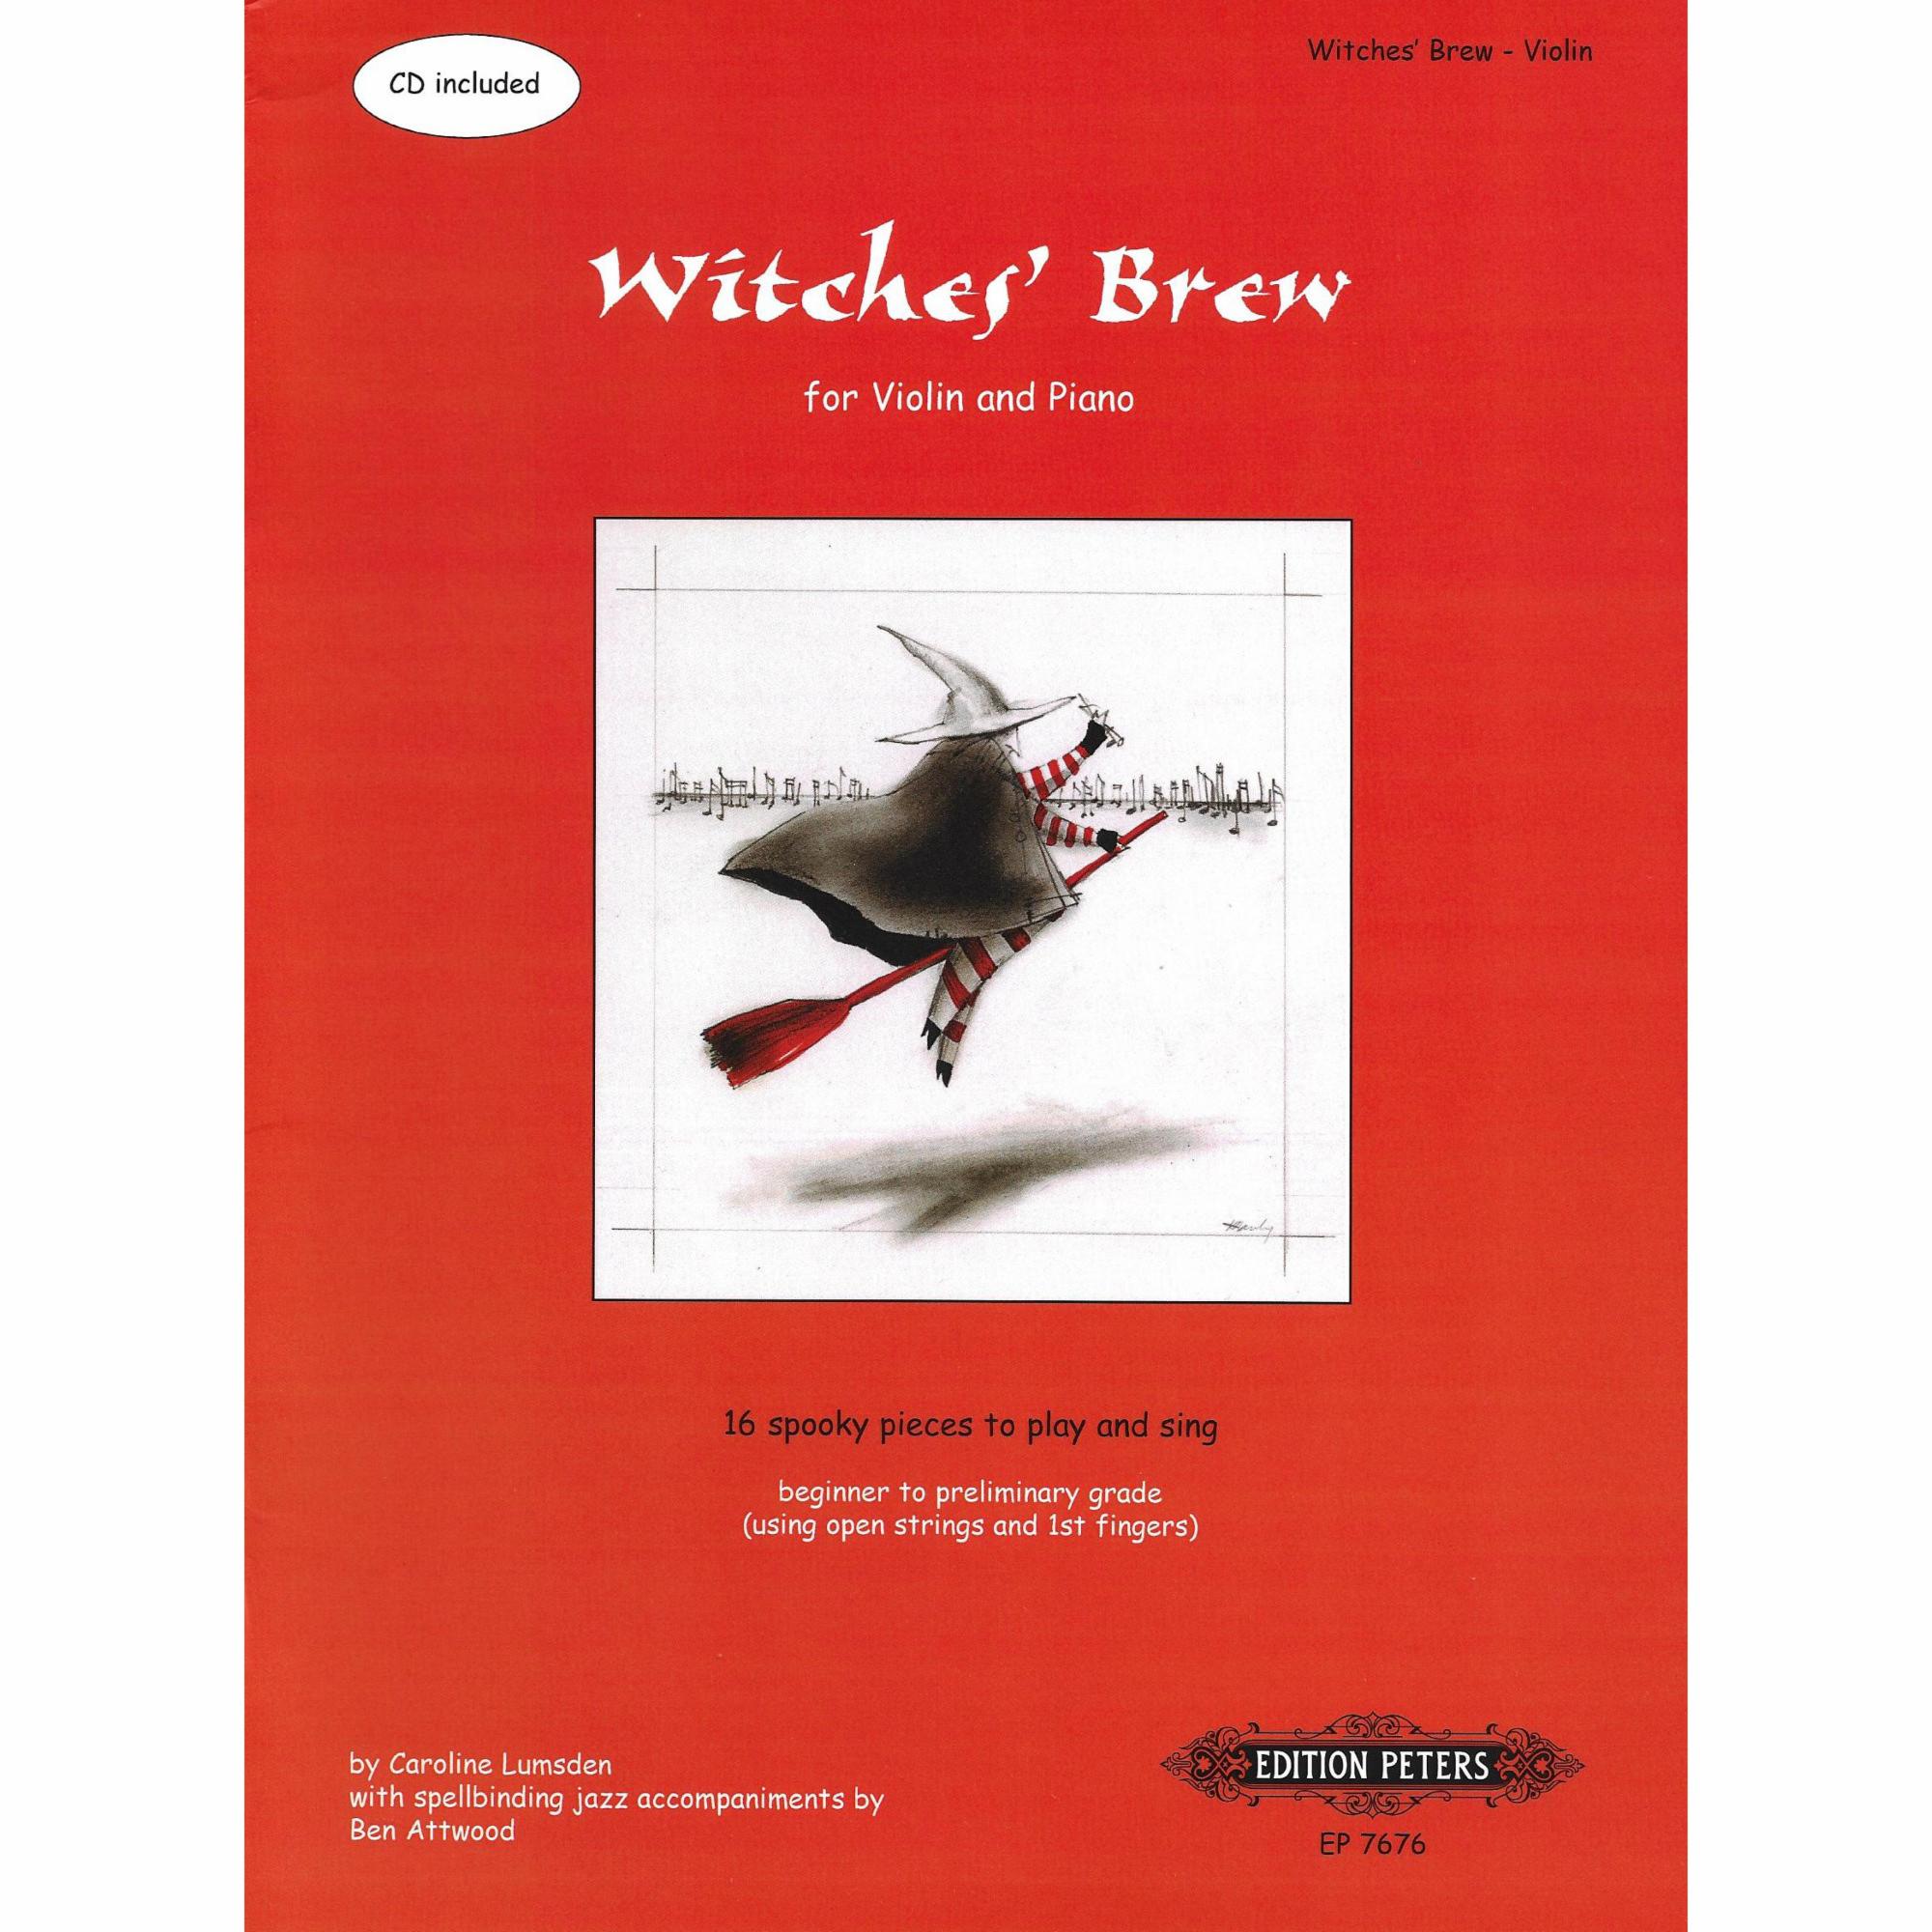 Witches' Brew for Violin or Cello and Piano